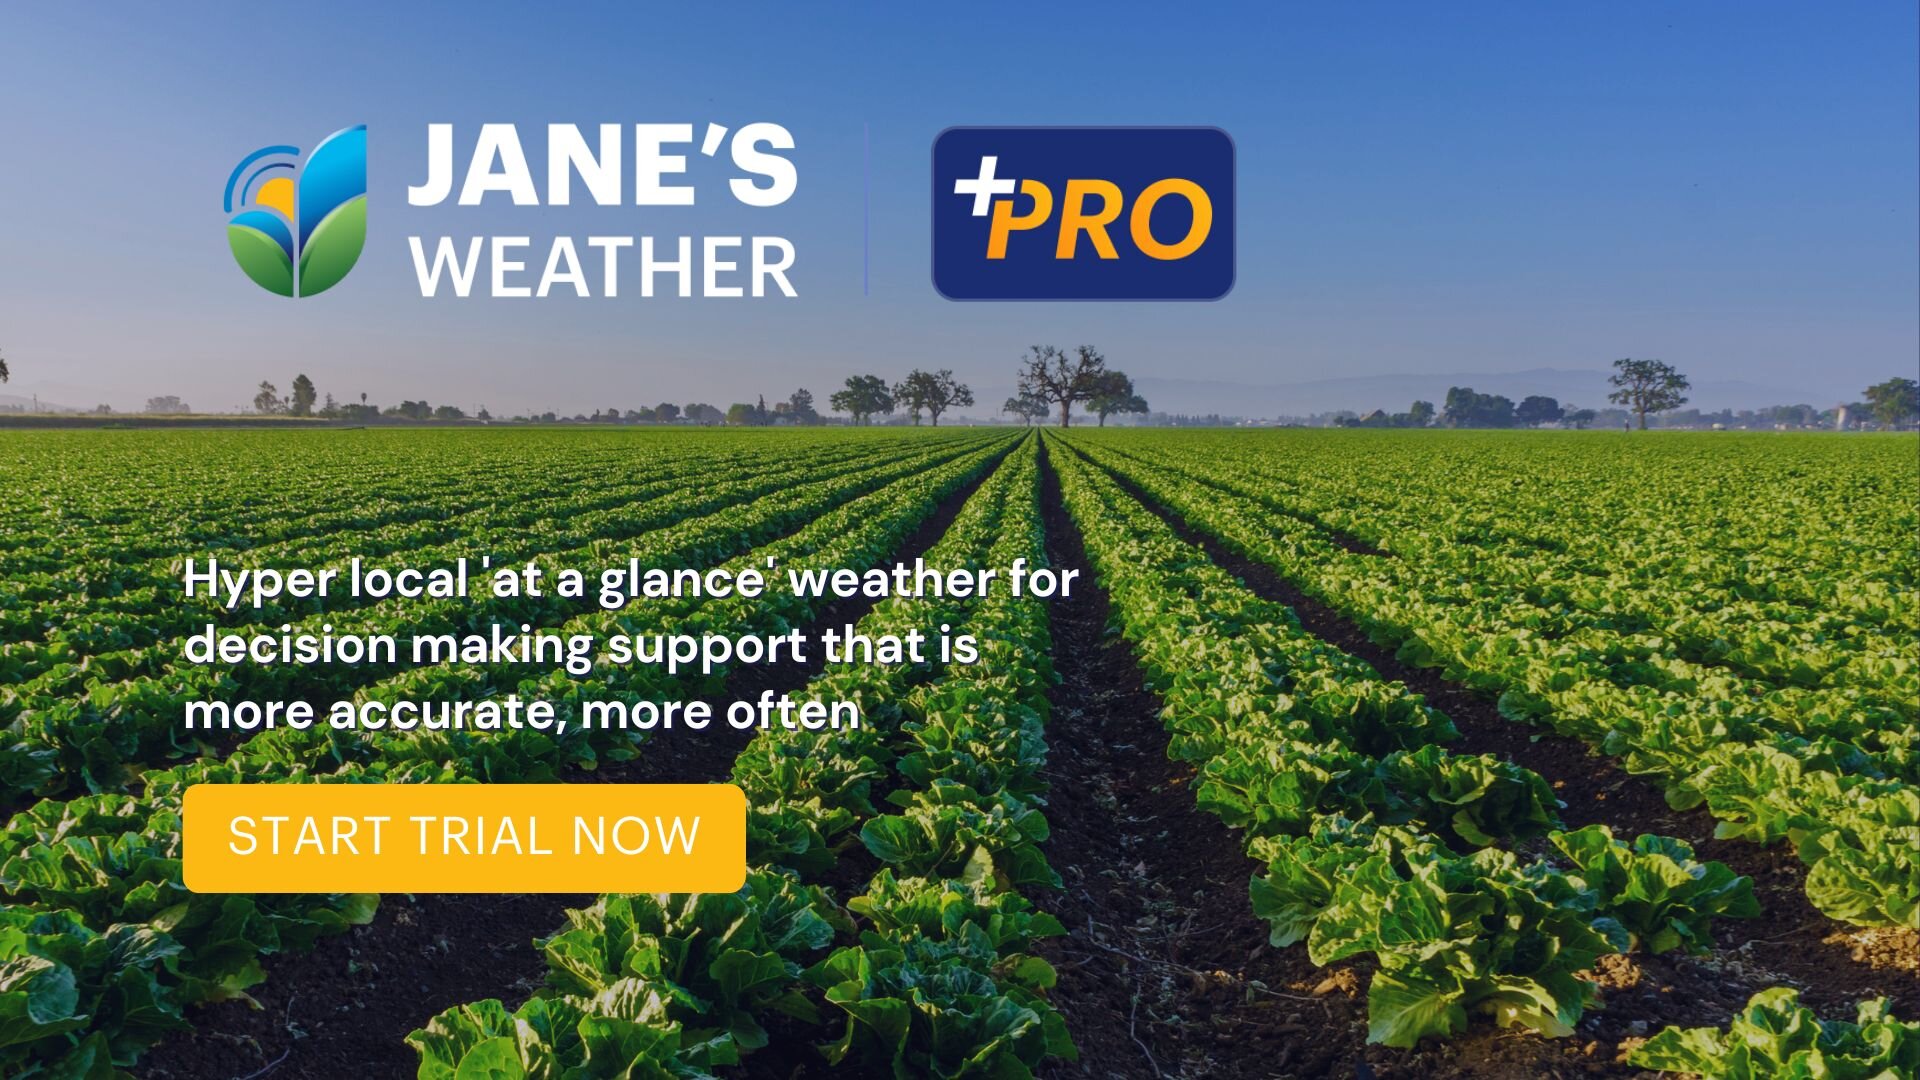 Jane's Weather PRO - join the waitlist, trial now open